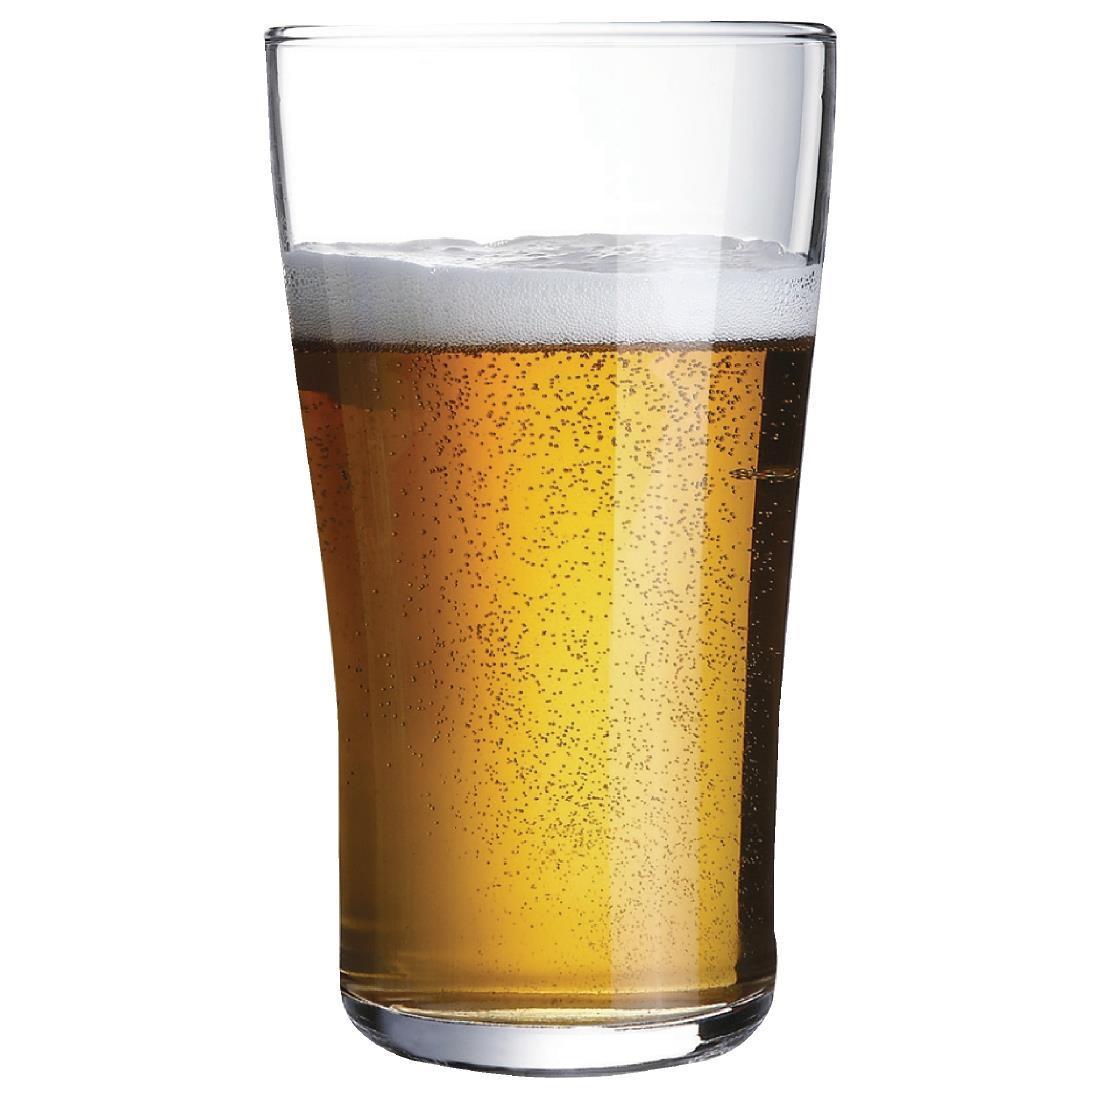 Arcoroc Ultimate Nucleated Beer Glasses 570ml (Pack of 24) - GC545  - 3